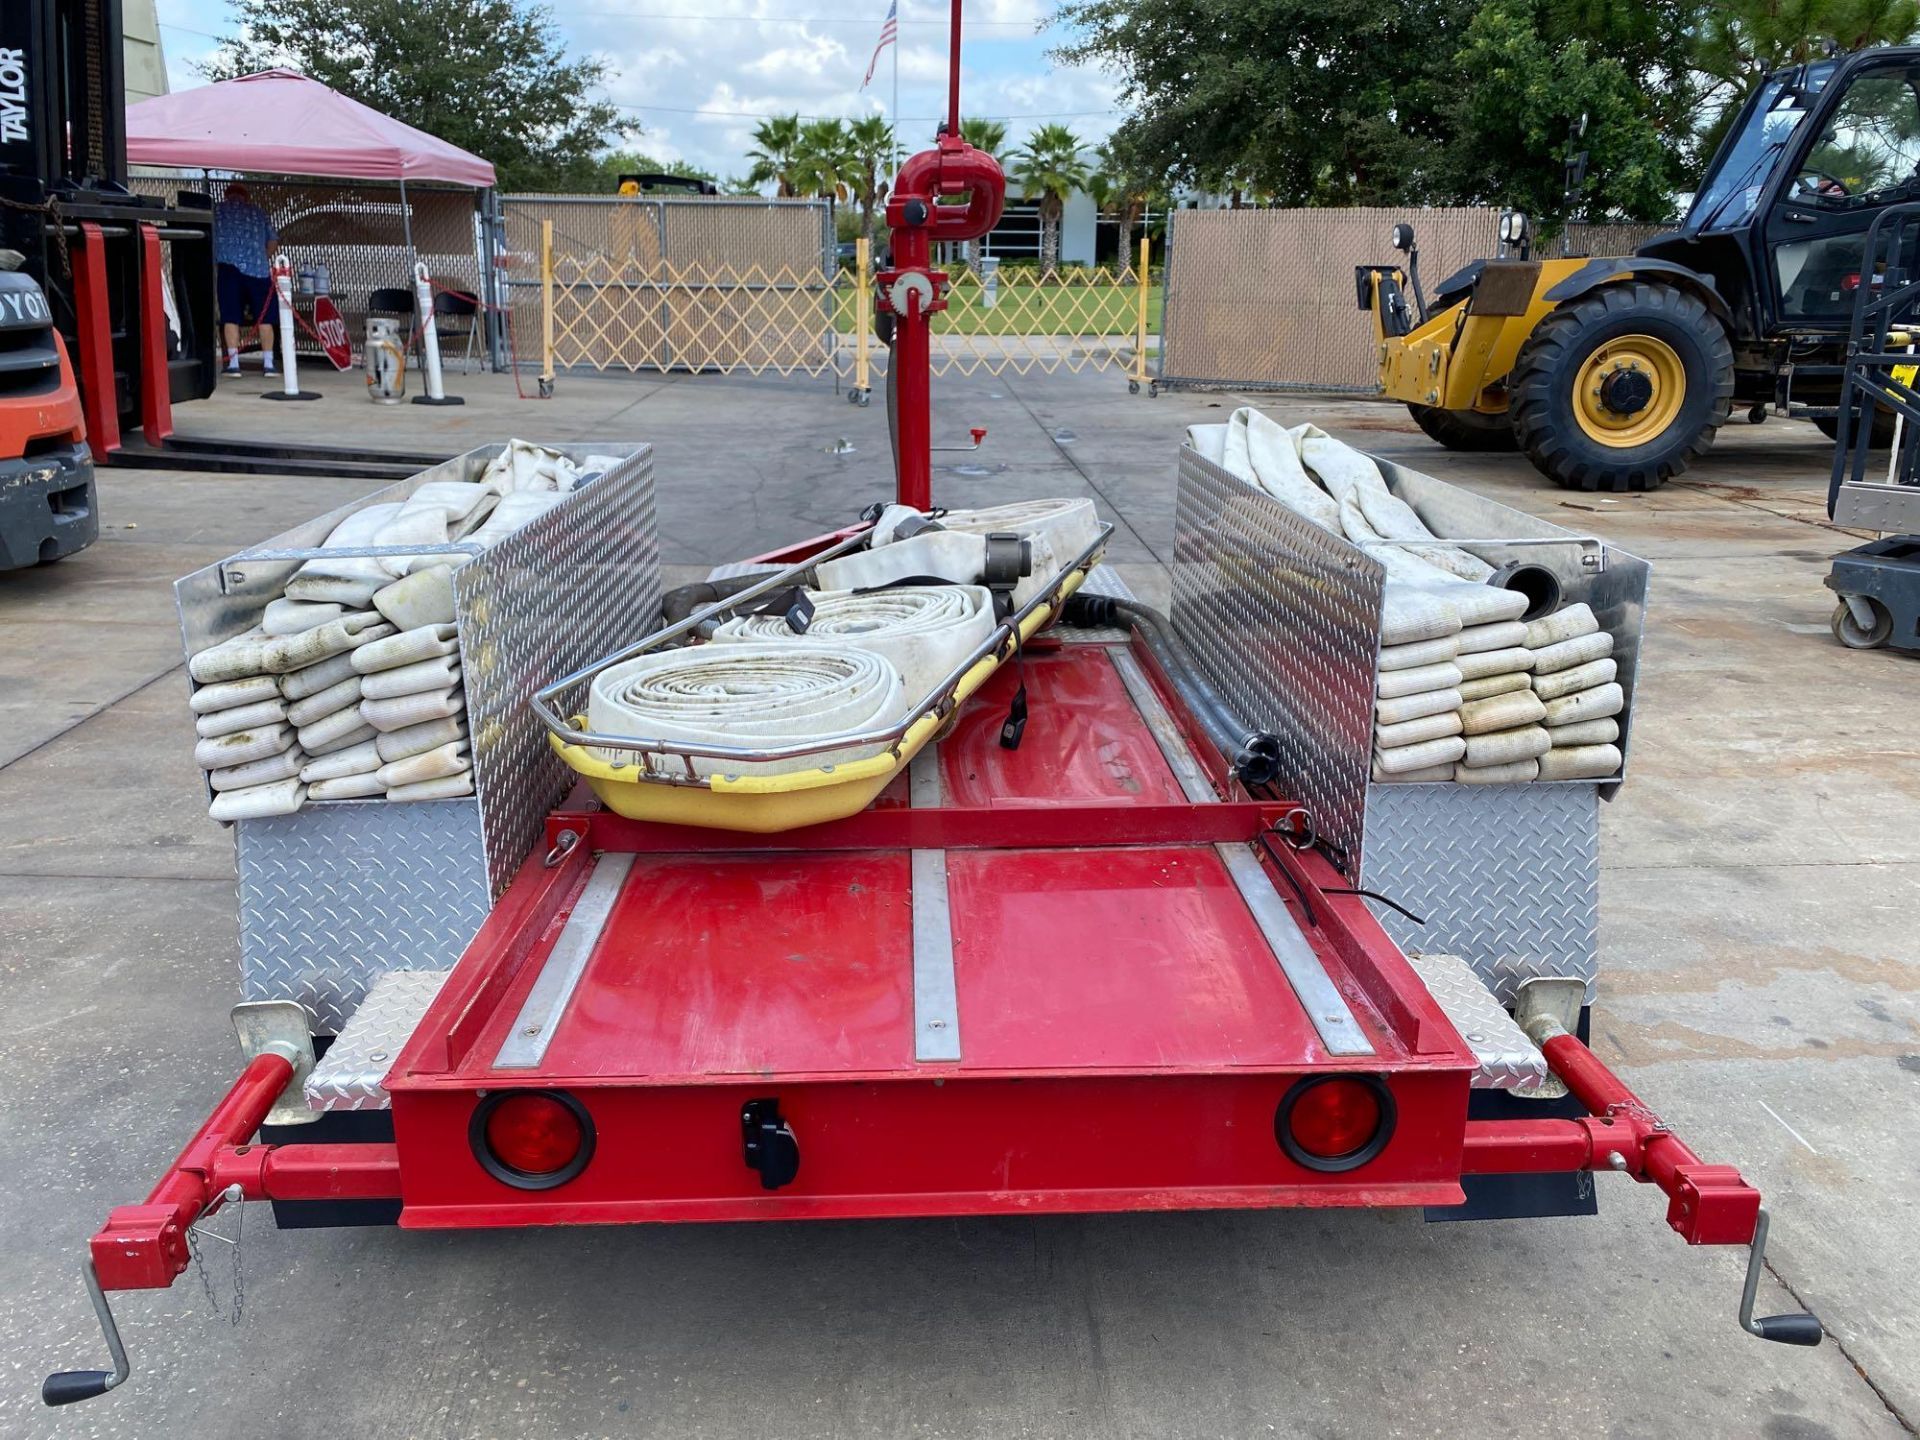 MGS INC. FIRE SUPPORT TRAILER WITH HOSES, STRETCHER, NATIONAL FOAM NOZZLE/ATTACHMENT - Image 6 of 14